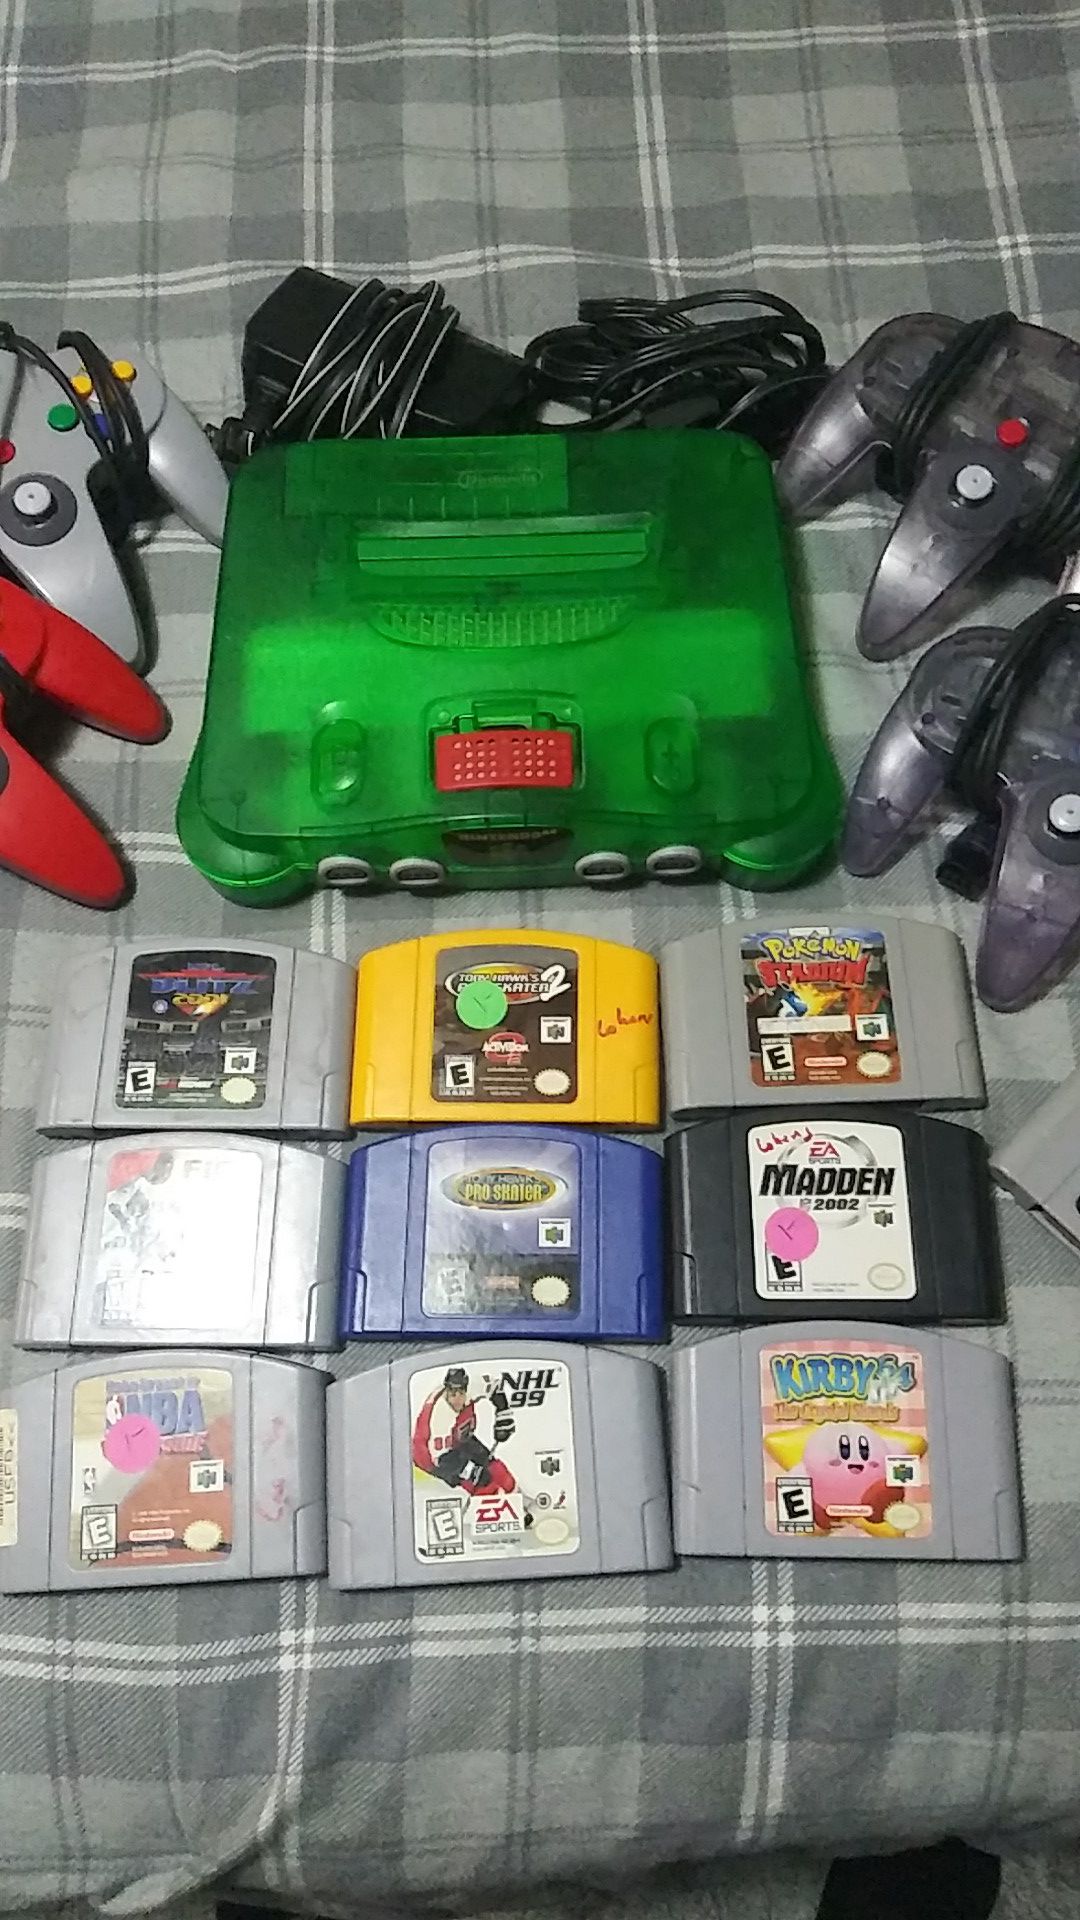 N64 with 4 controllers and wires. Games included. $50 take all